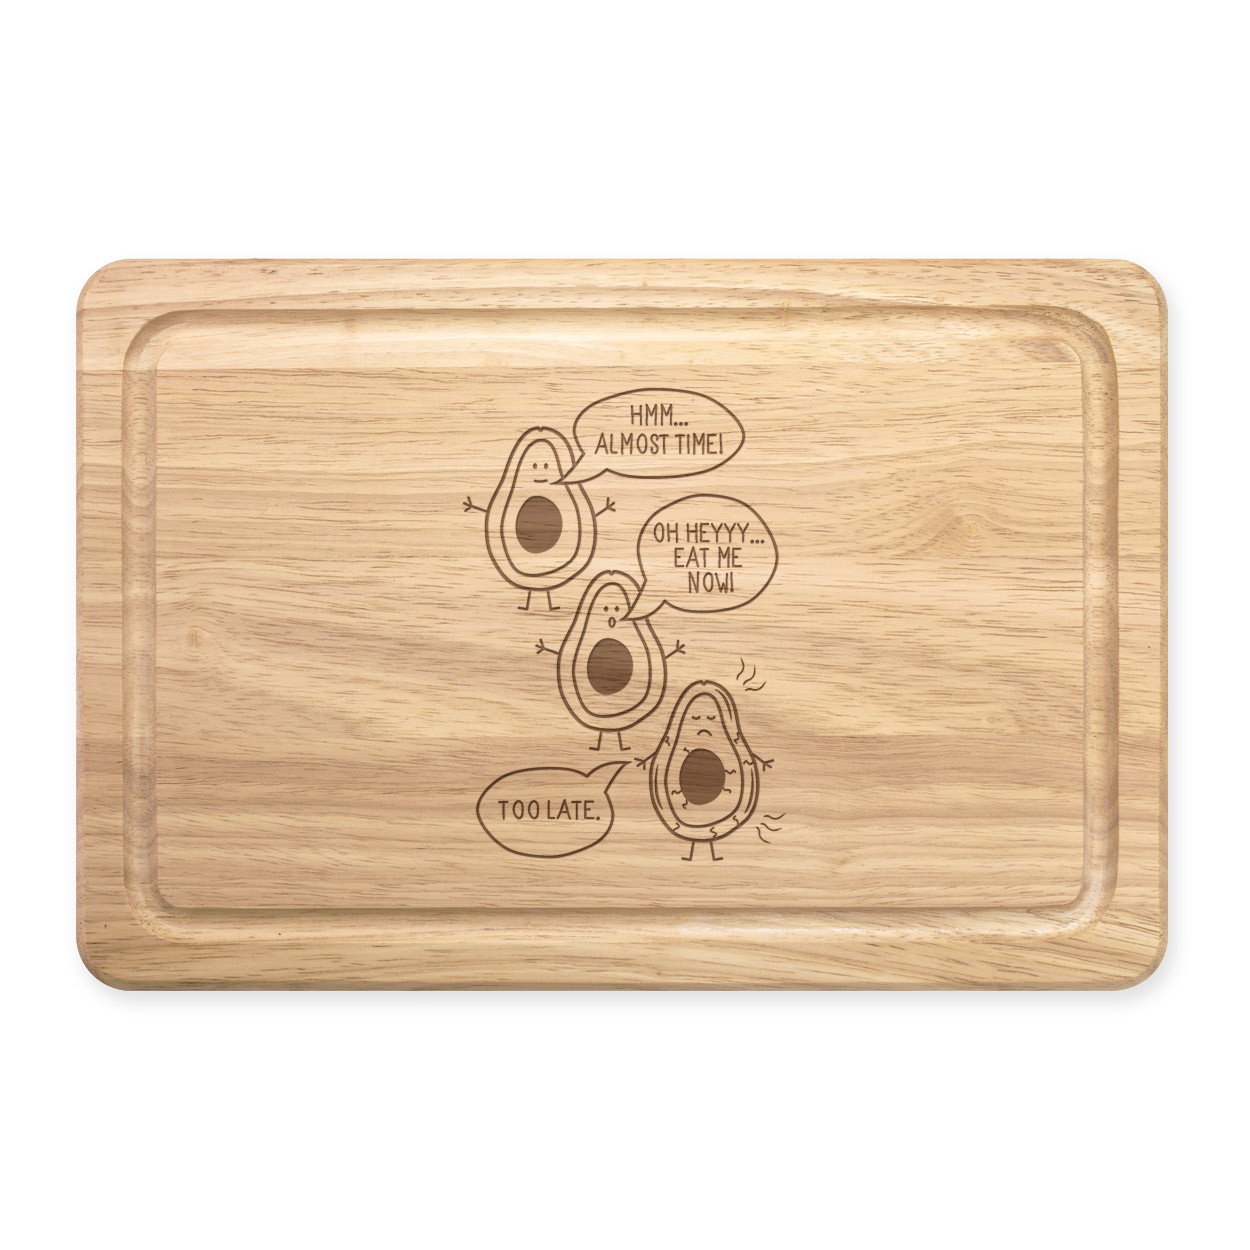 Avocado Eat Me Now Too Late Rectangular Wooden Chopping Board